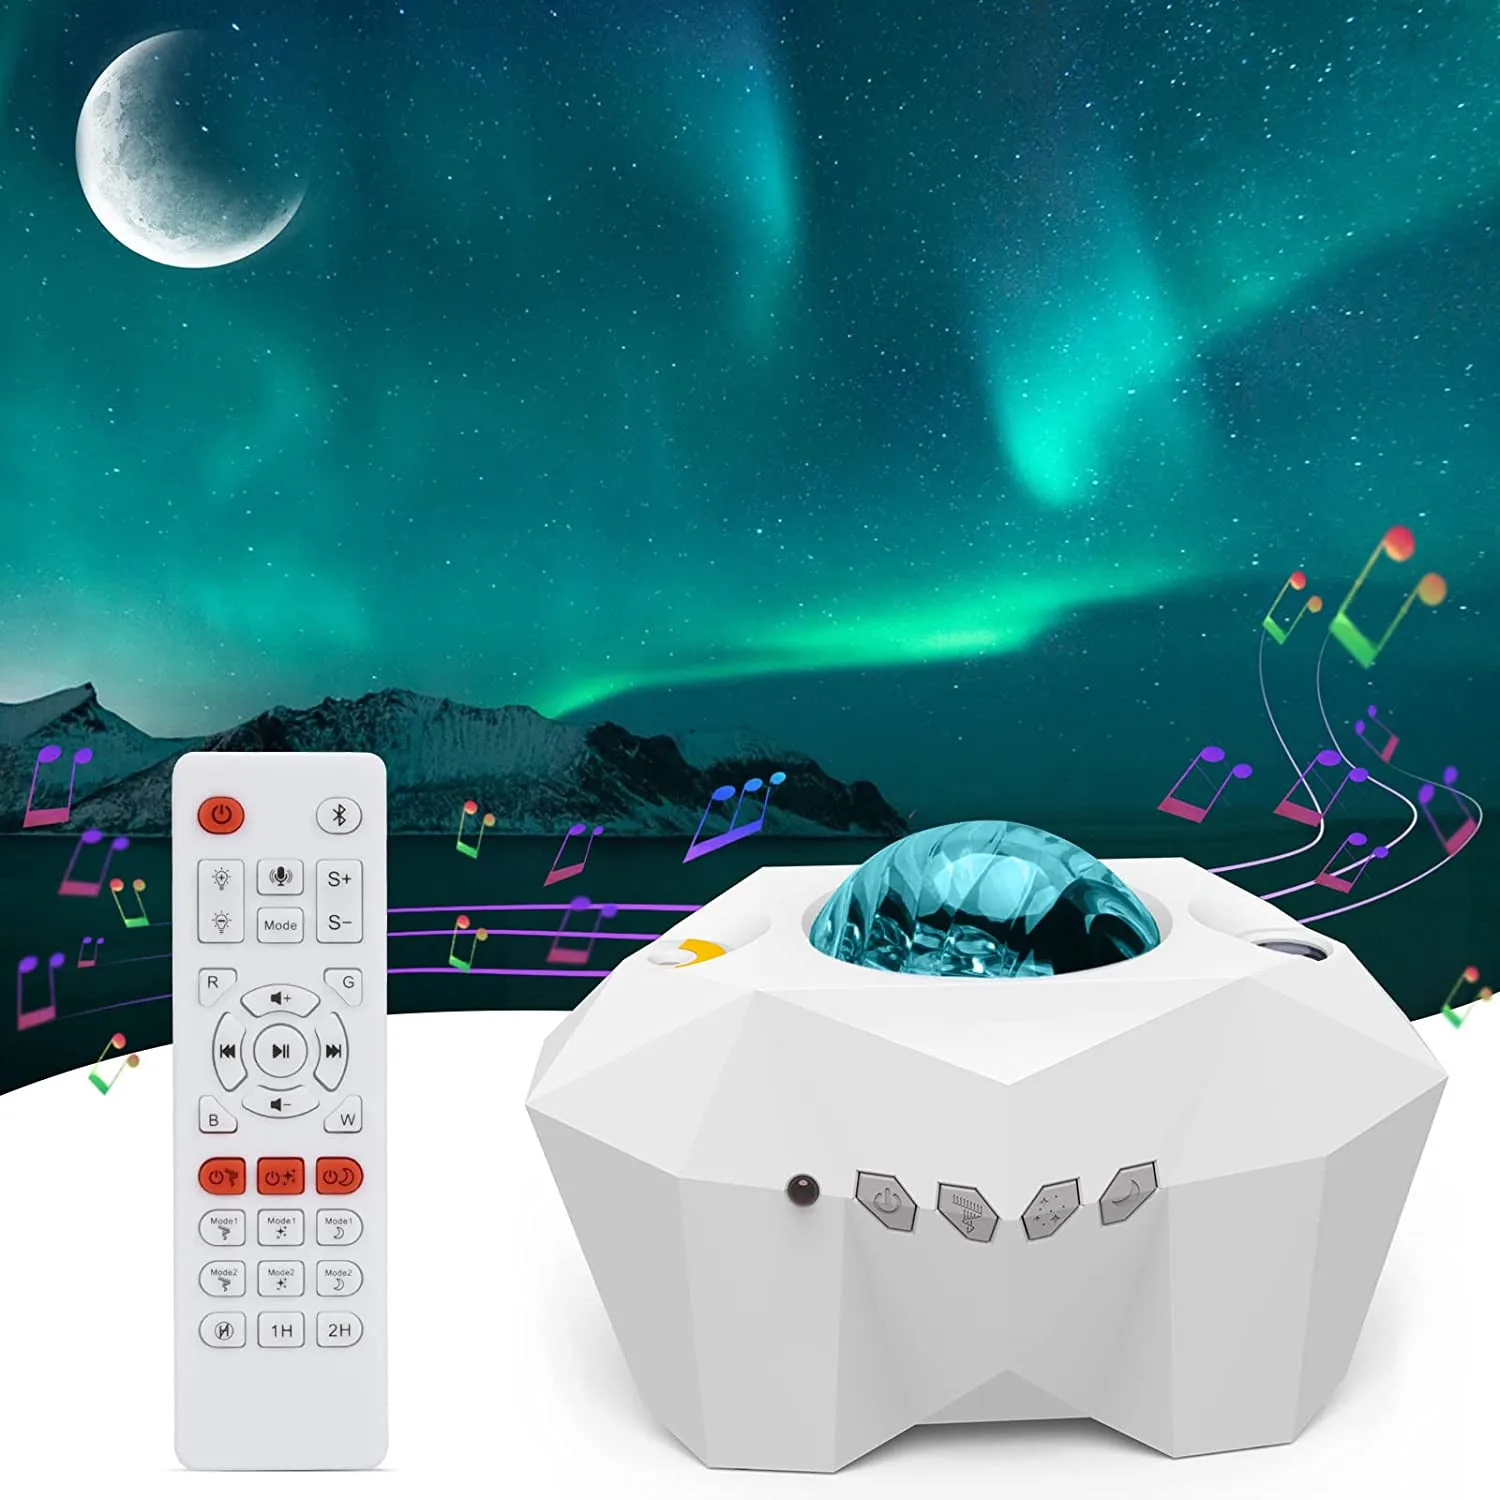  projector night light bluetooth music speaker star projection lamp for kids room decor thumb200